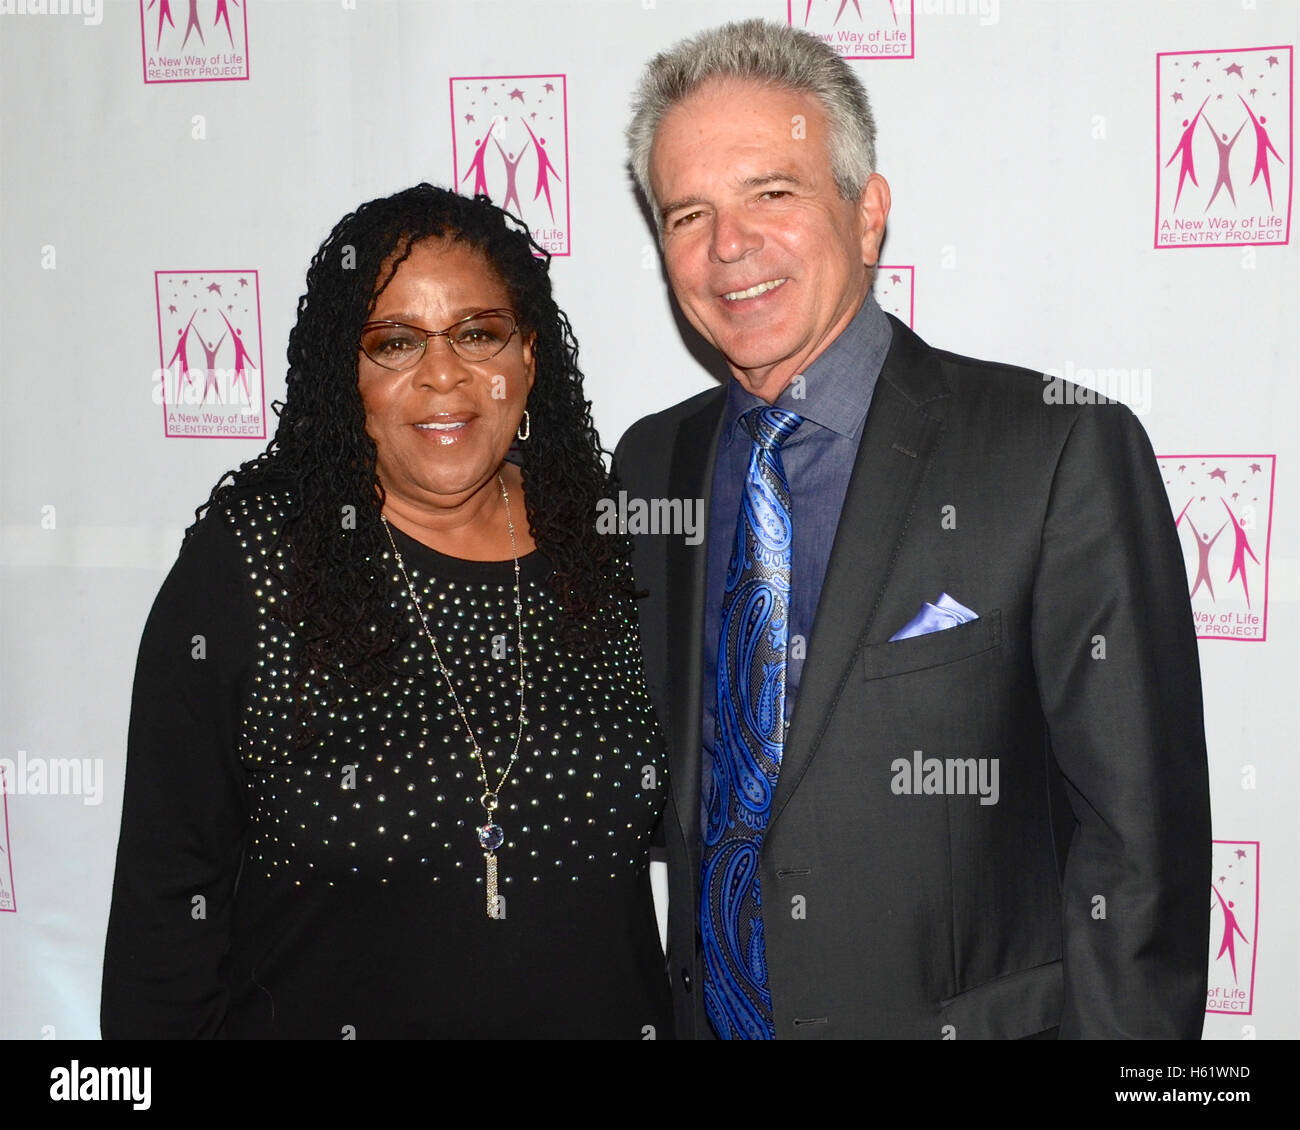 Susan Burton And Tony Denison Attends Cnn Hero Susan Burton S A New Way Of Life Re Entry Project 17th Annual Red Carpet Awards Gala At The Omni Hotel In Los Angeles California On